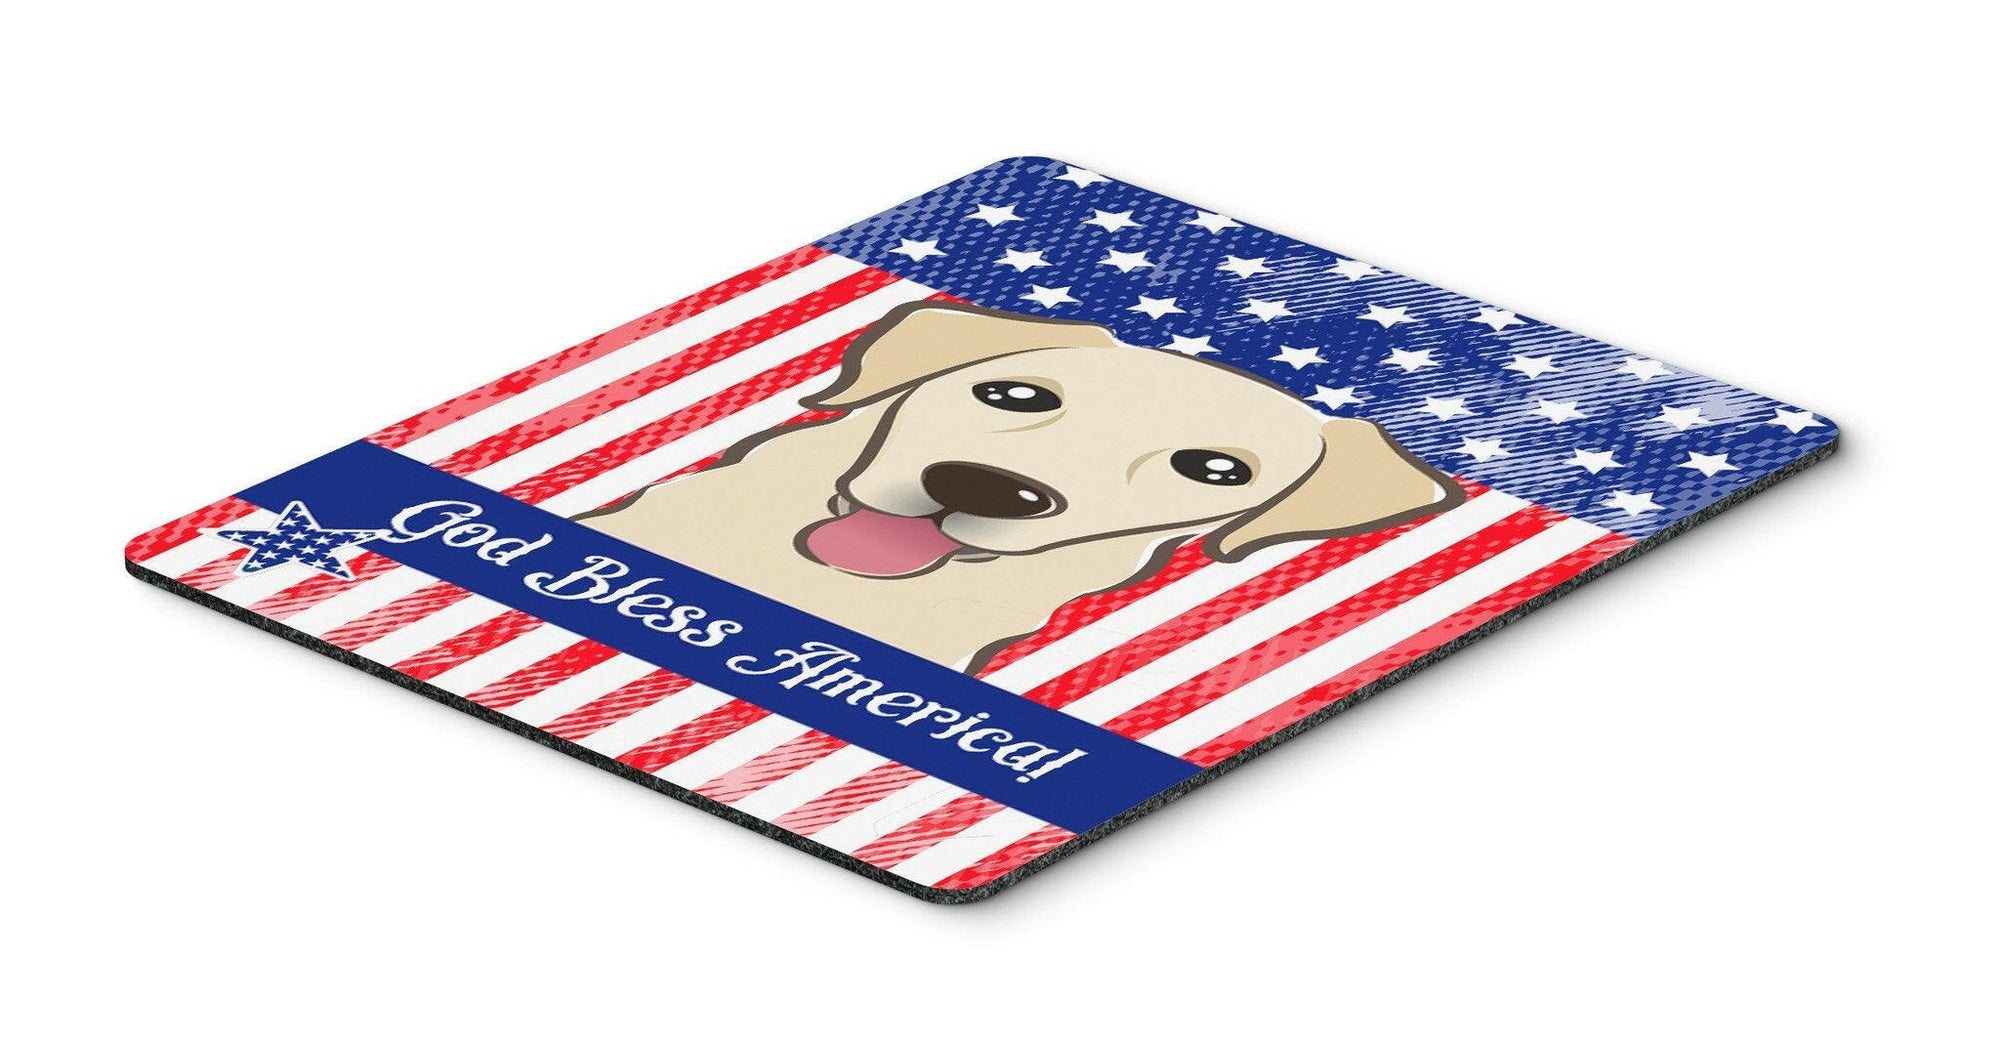 God Bless American Flag with Golden Retriever Mouse Pad, Hot Pad or Trivet BB2182MP by Caroline's Treasures